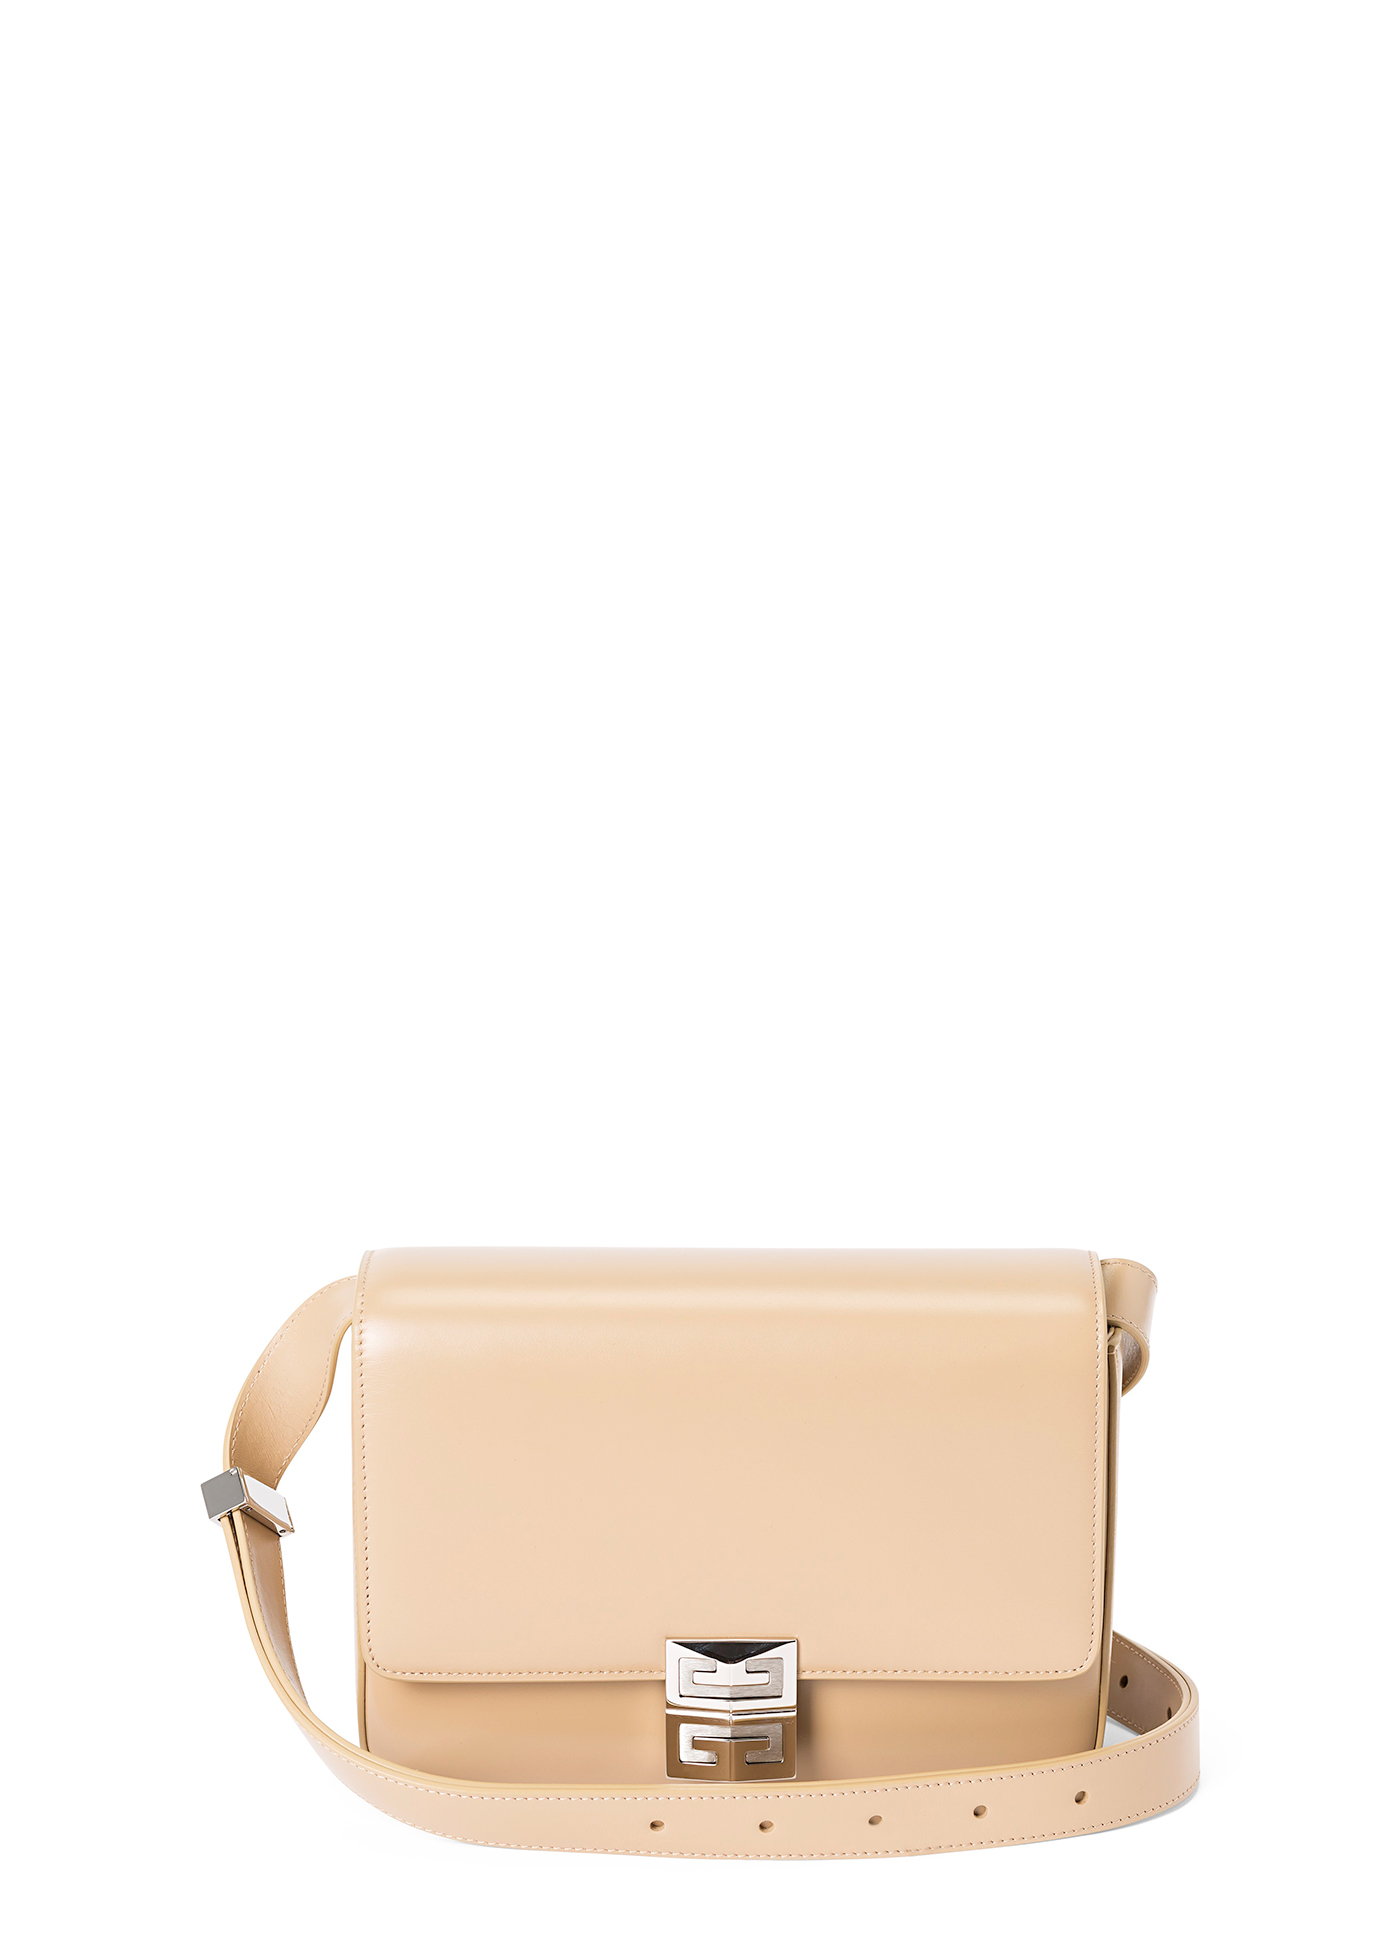 4G - SMALL CROSSBODY BAG image number 0